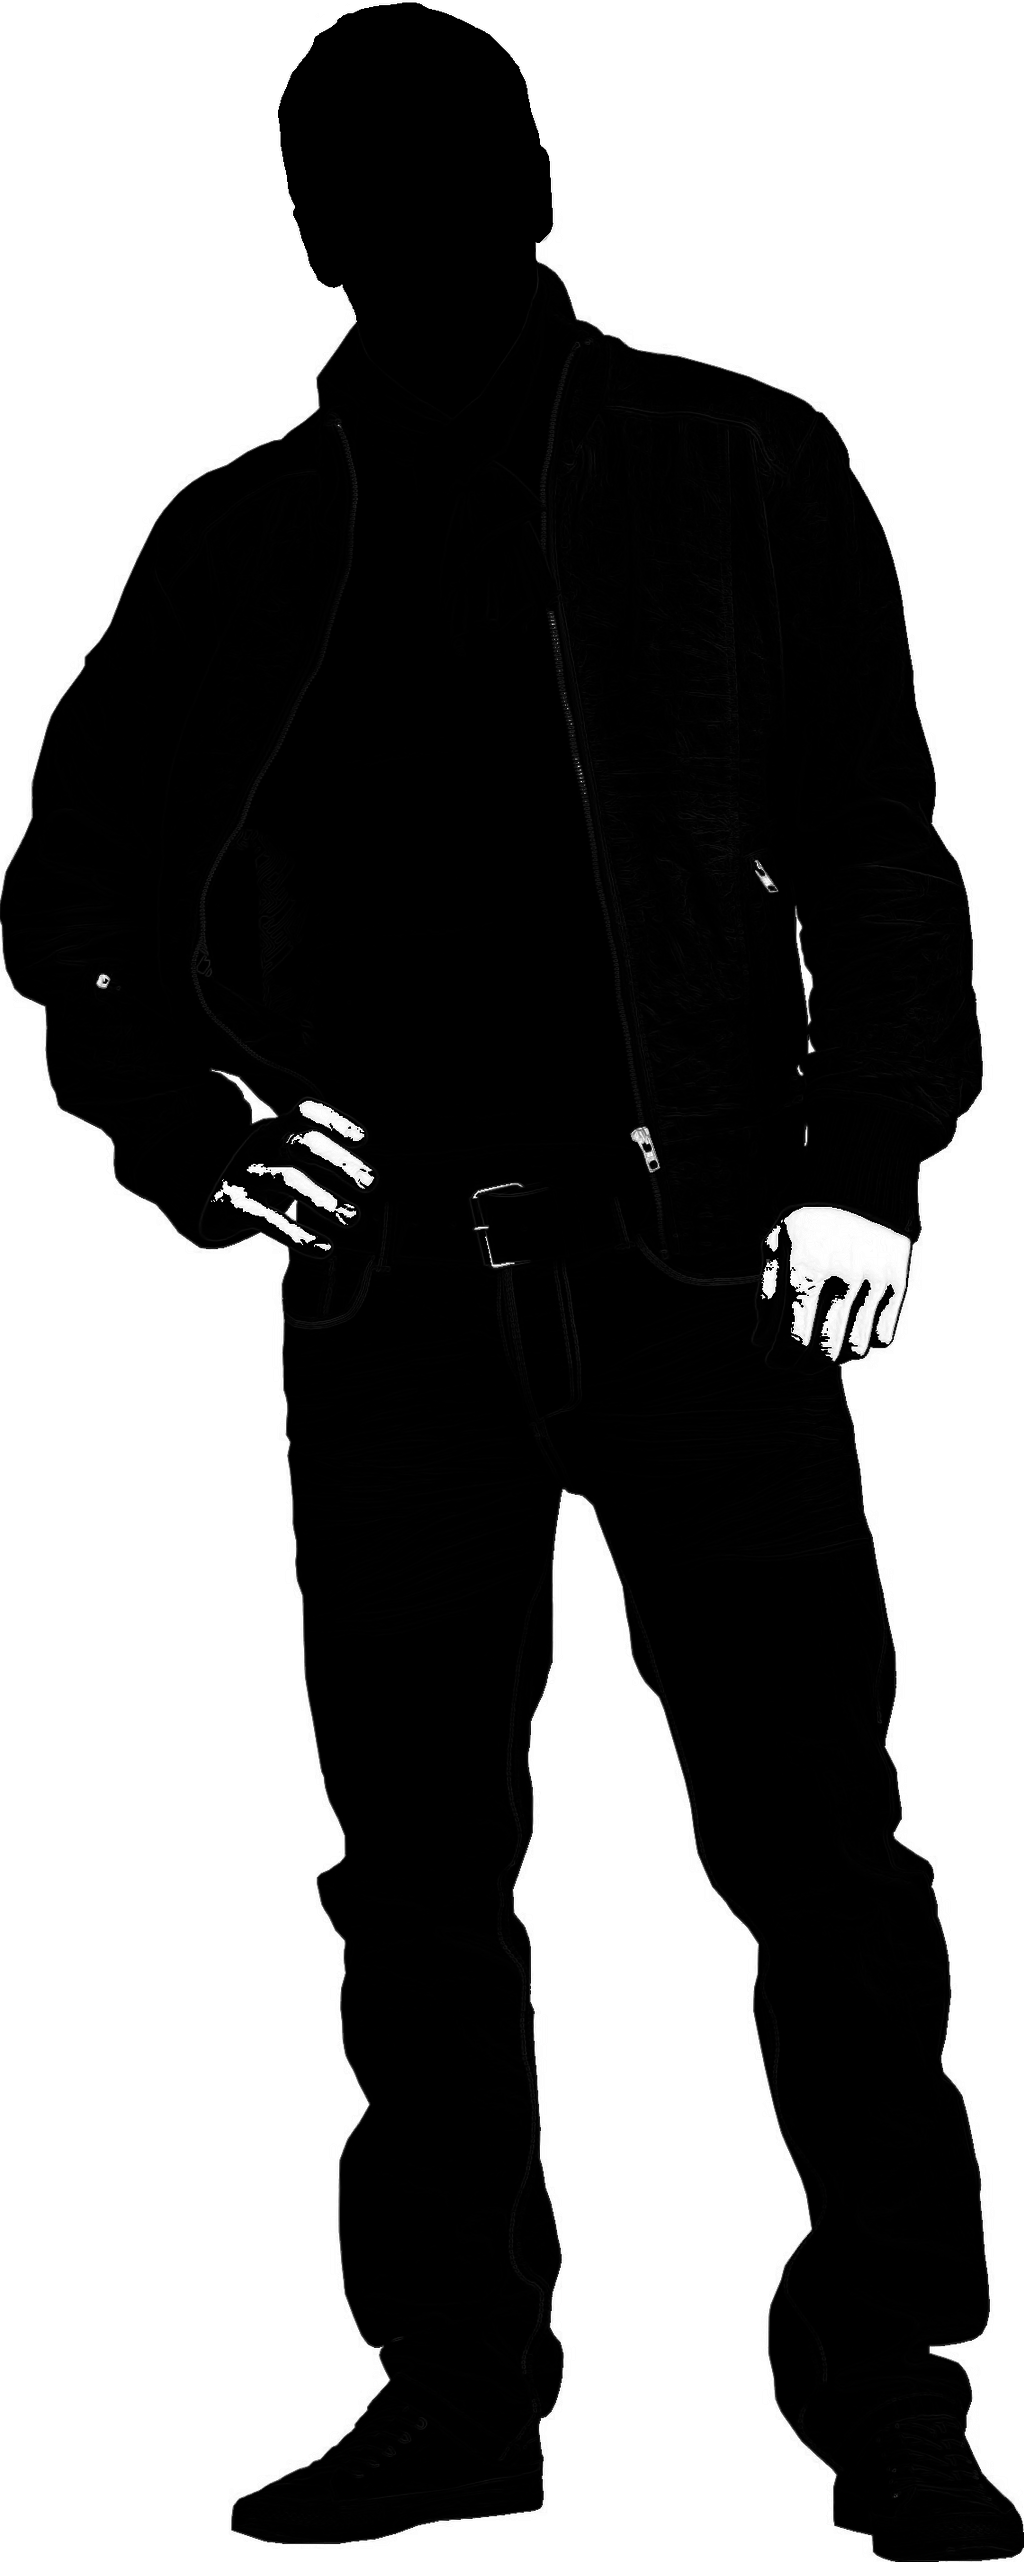 Male silhouette by seremela05 on Clipart library